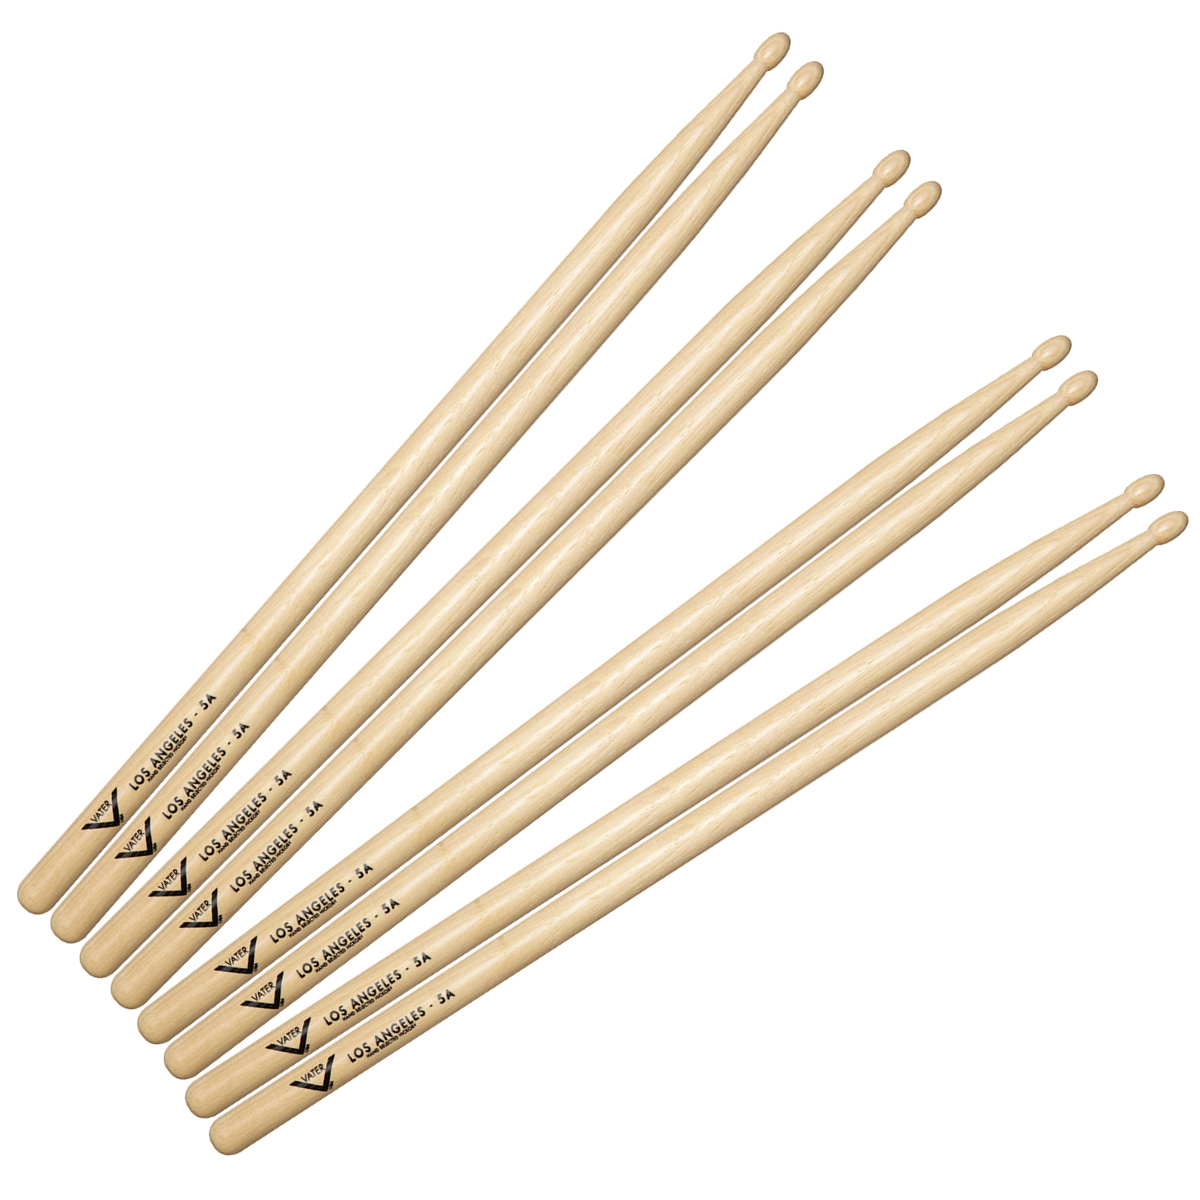 VATER X4 LOS ANGELES 5A HICKORY PACK